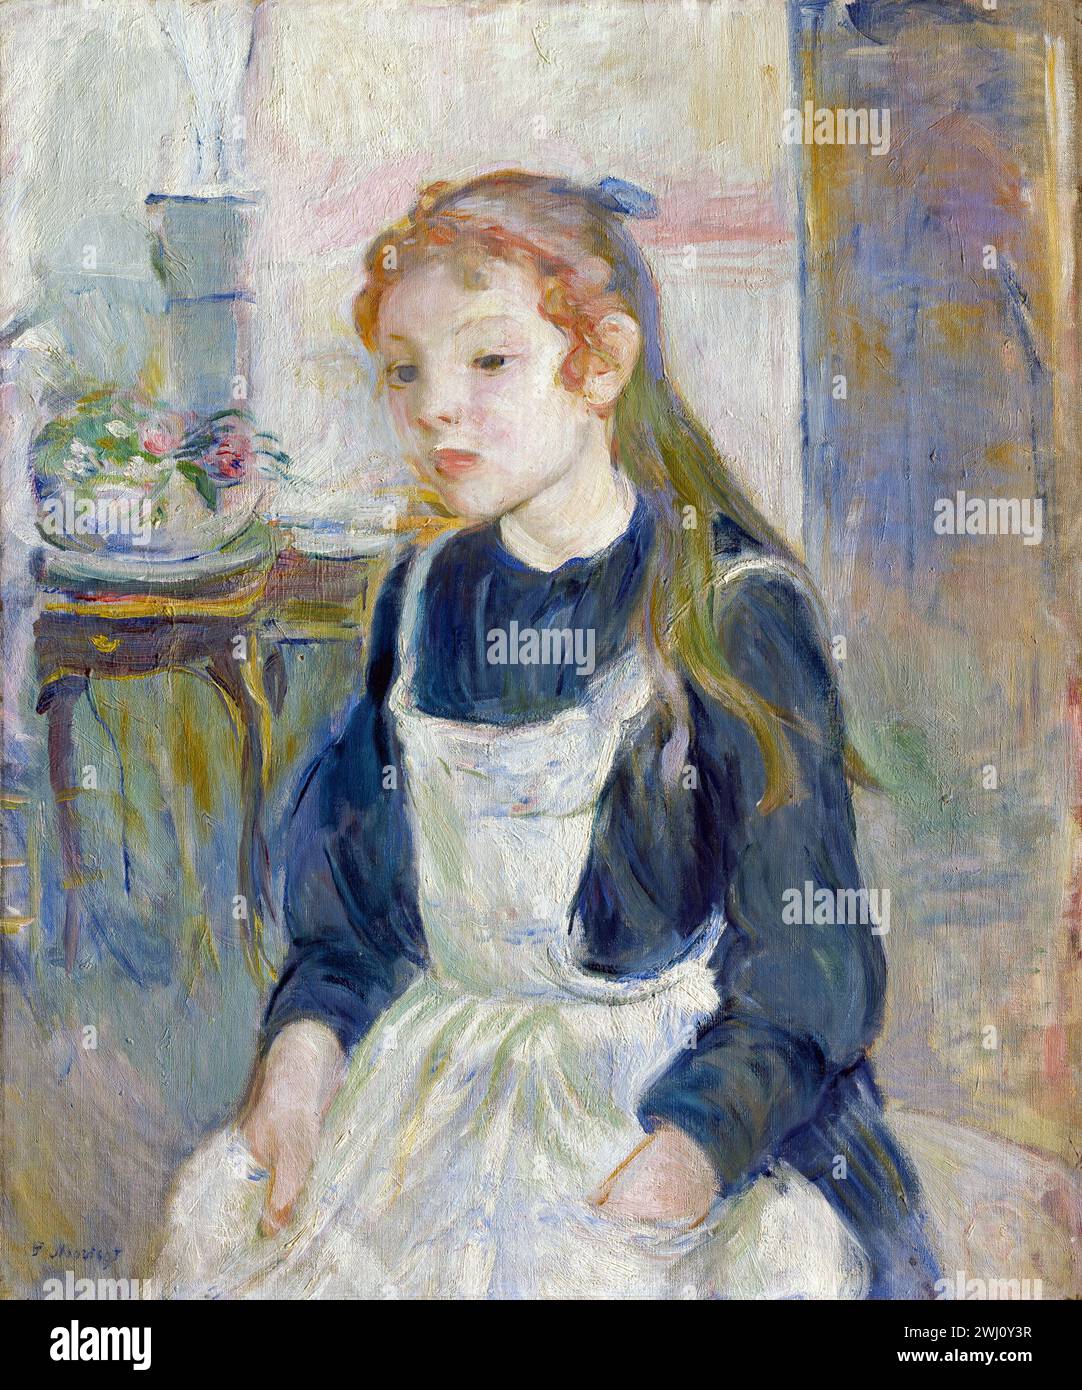 Berthe Morisot - Young girl with an apron [1891] Stock Photo